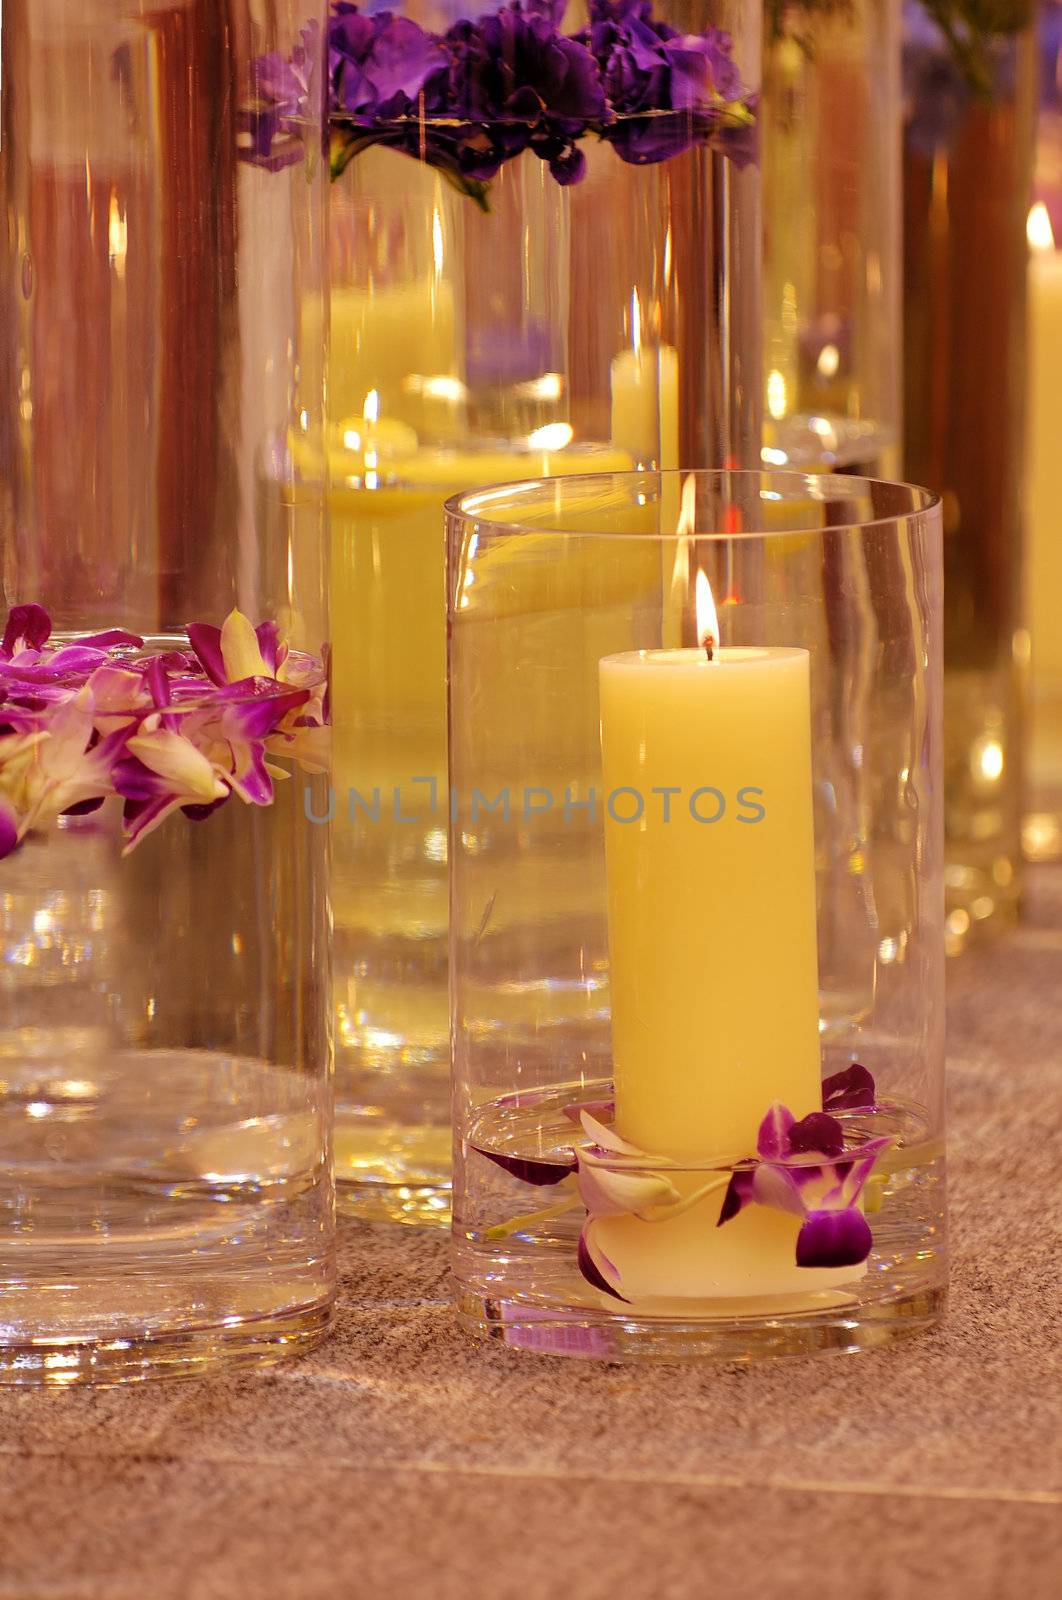 The shot of spa candles and flowers